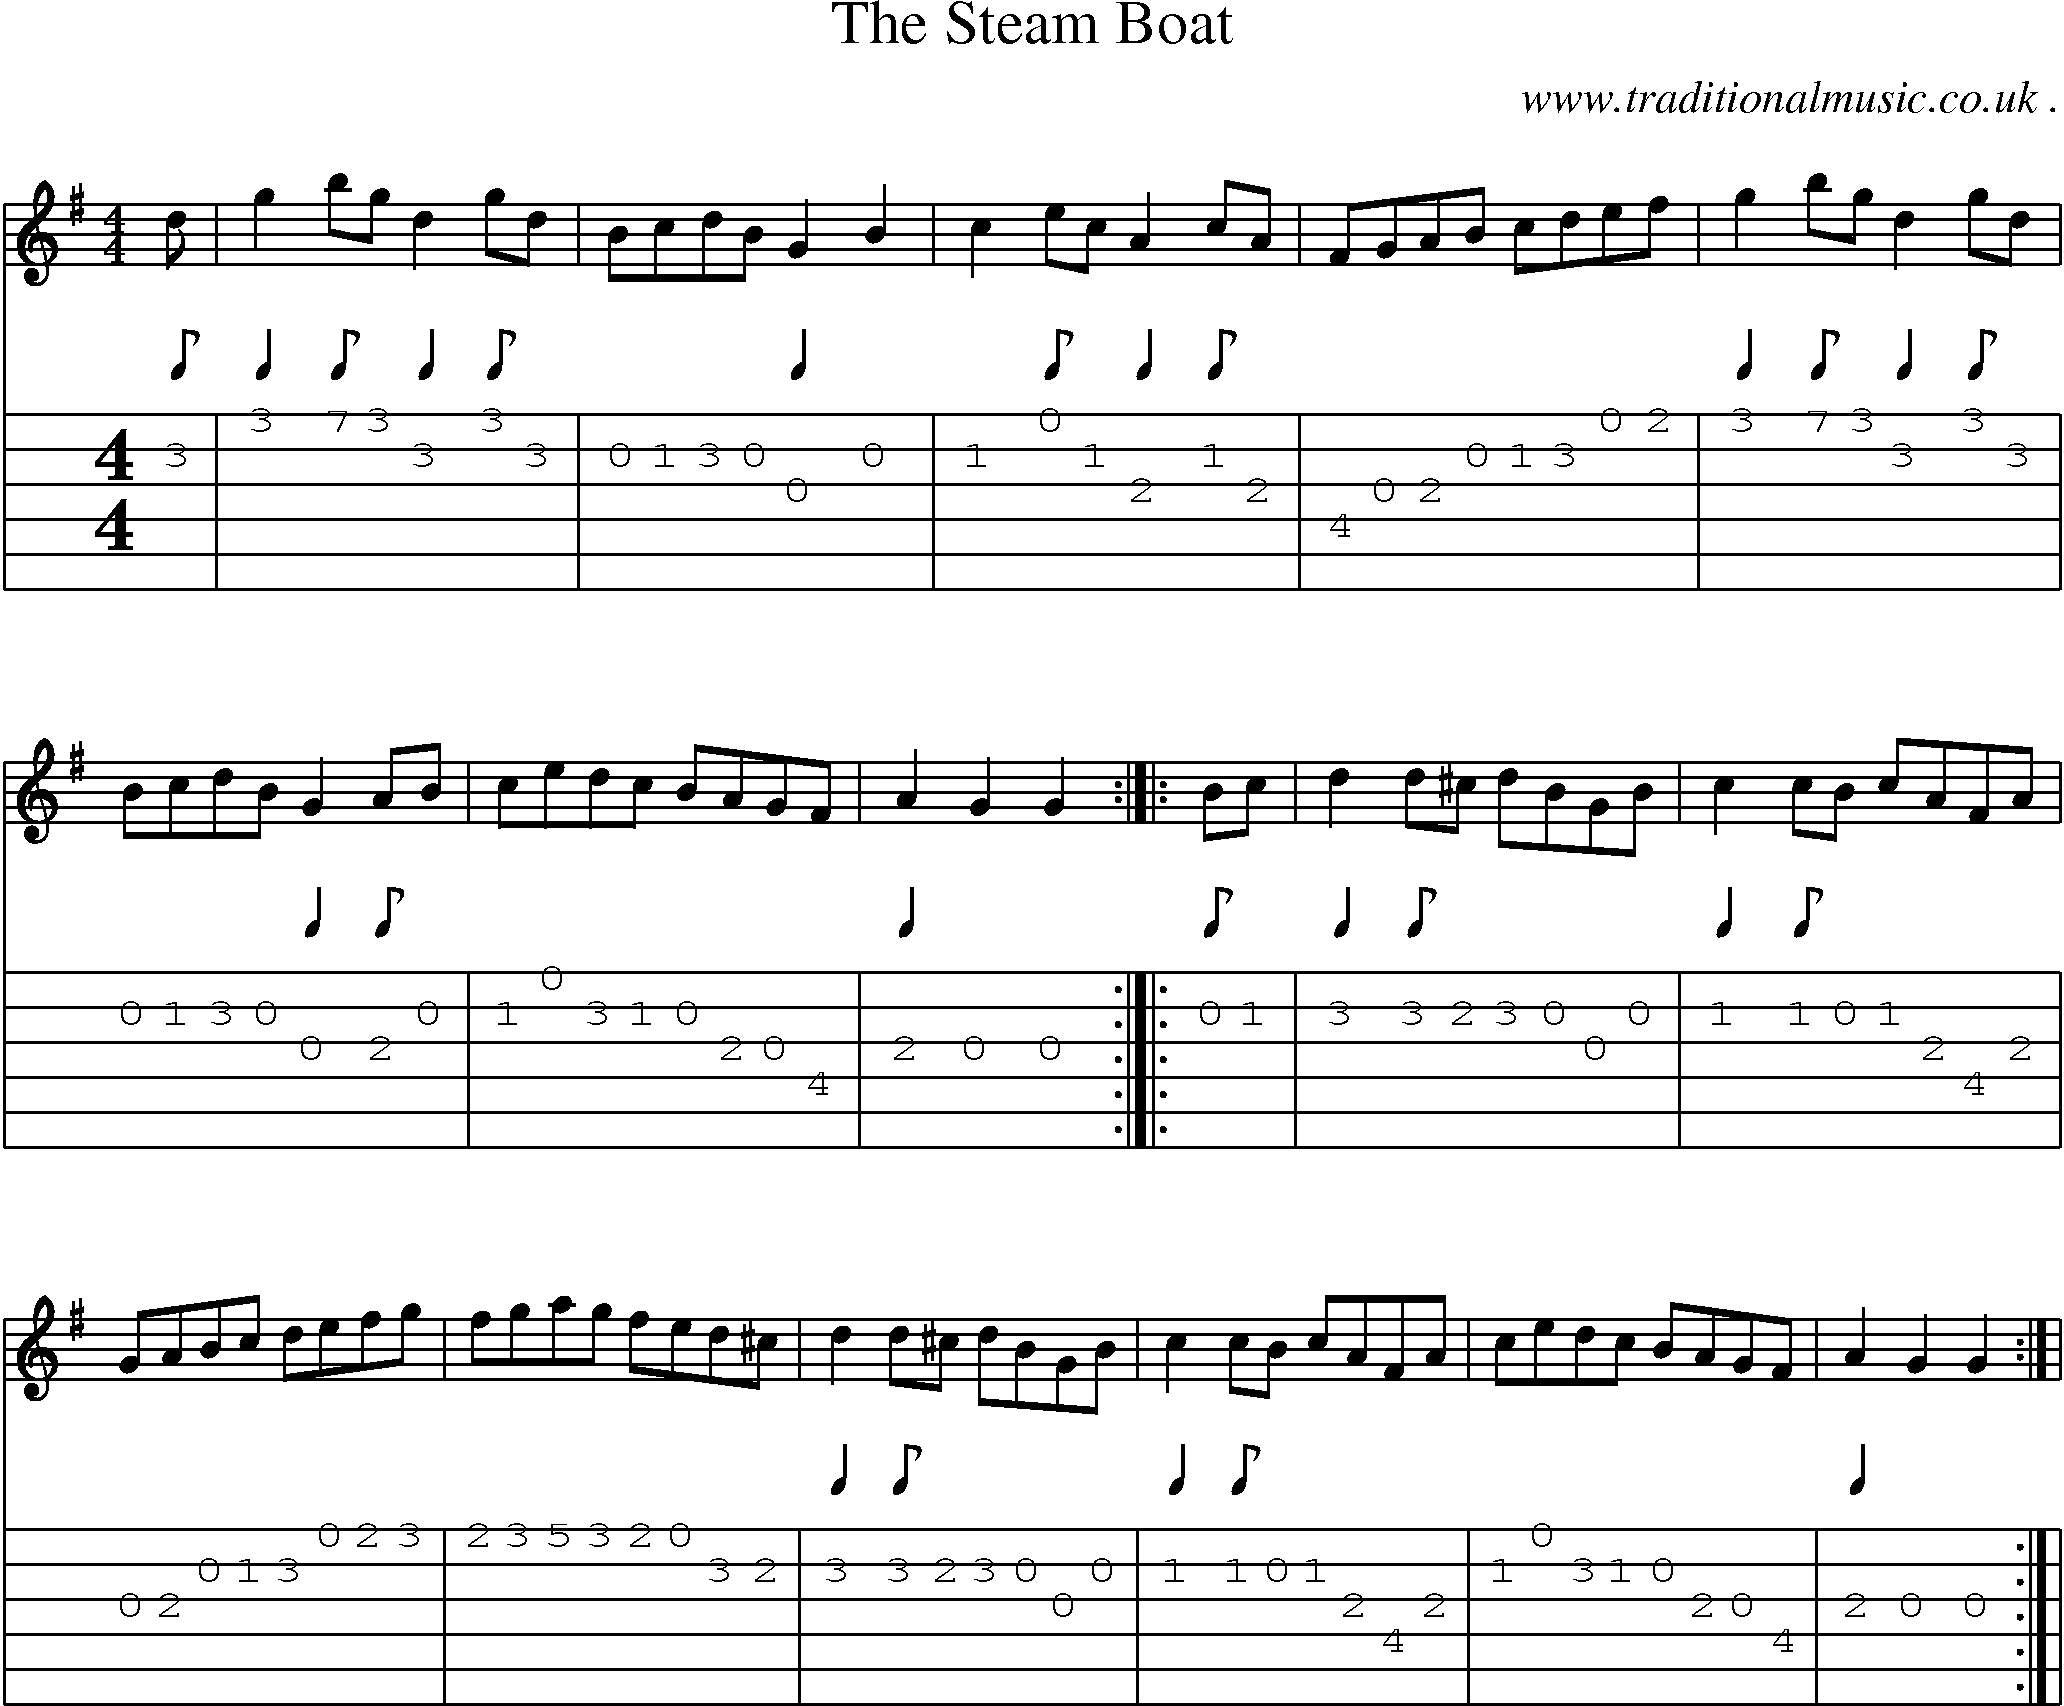 Sheet-Music and Guitar Tabs for The Steam Boat